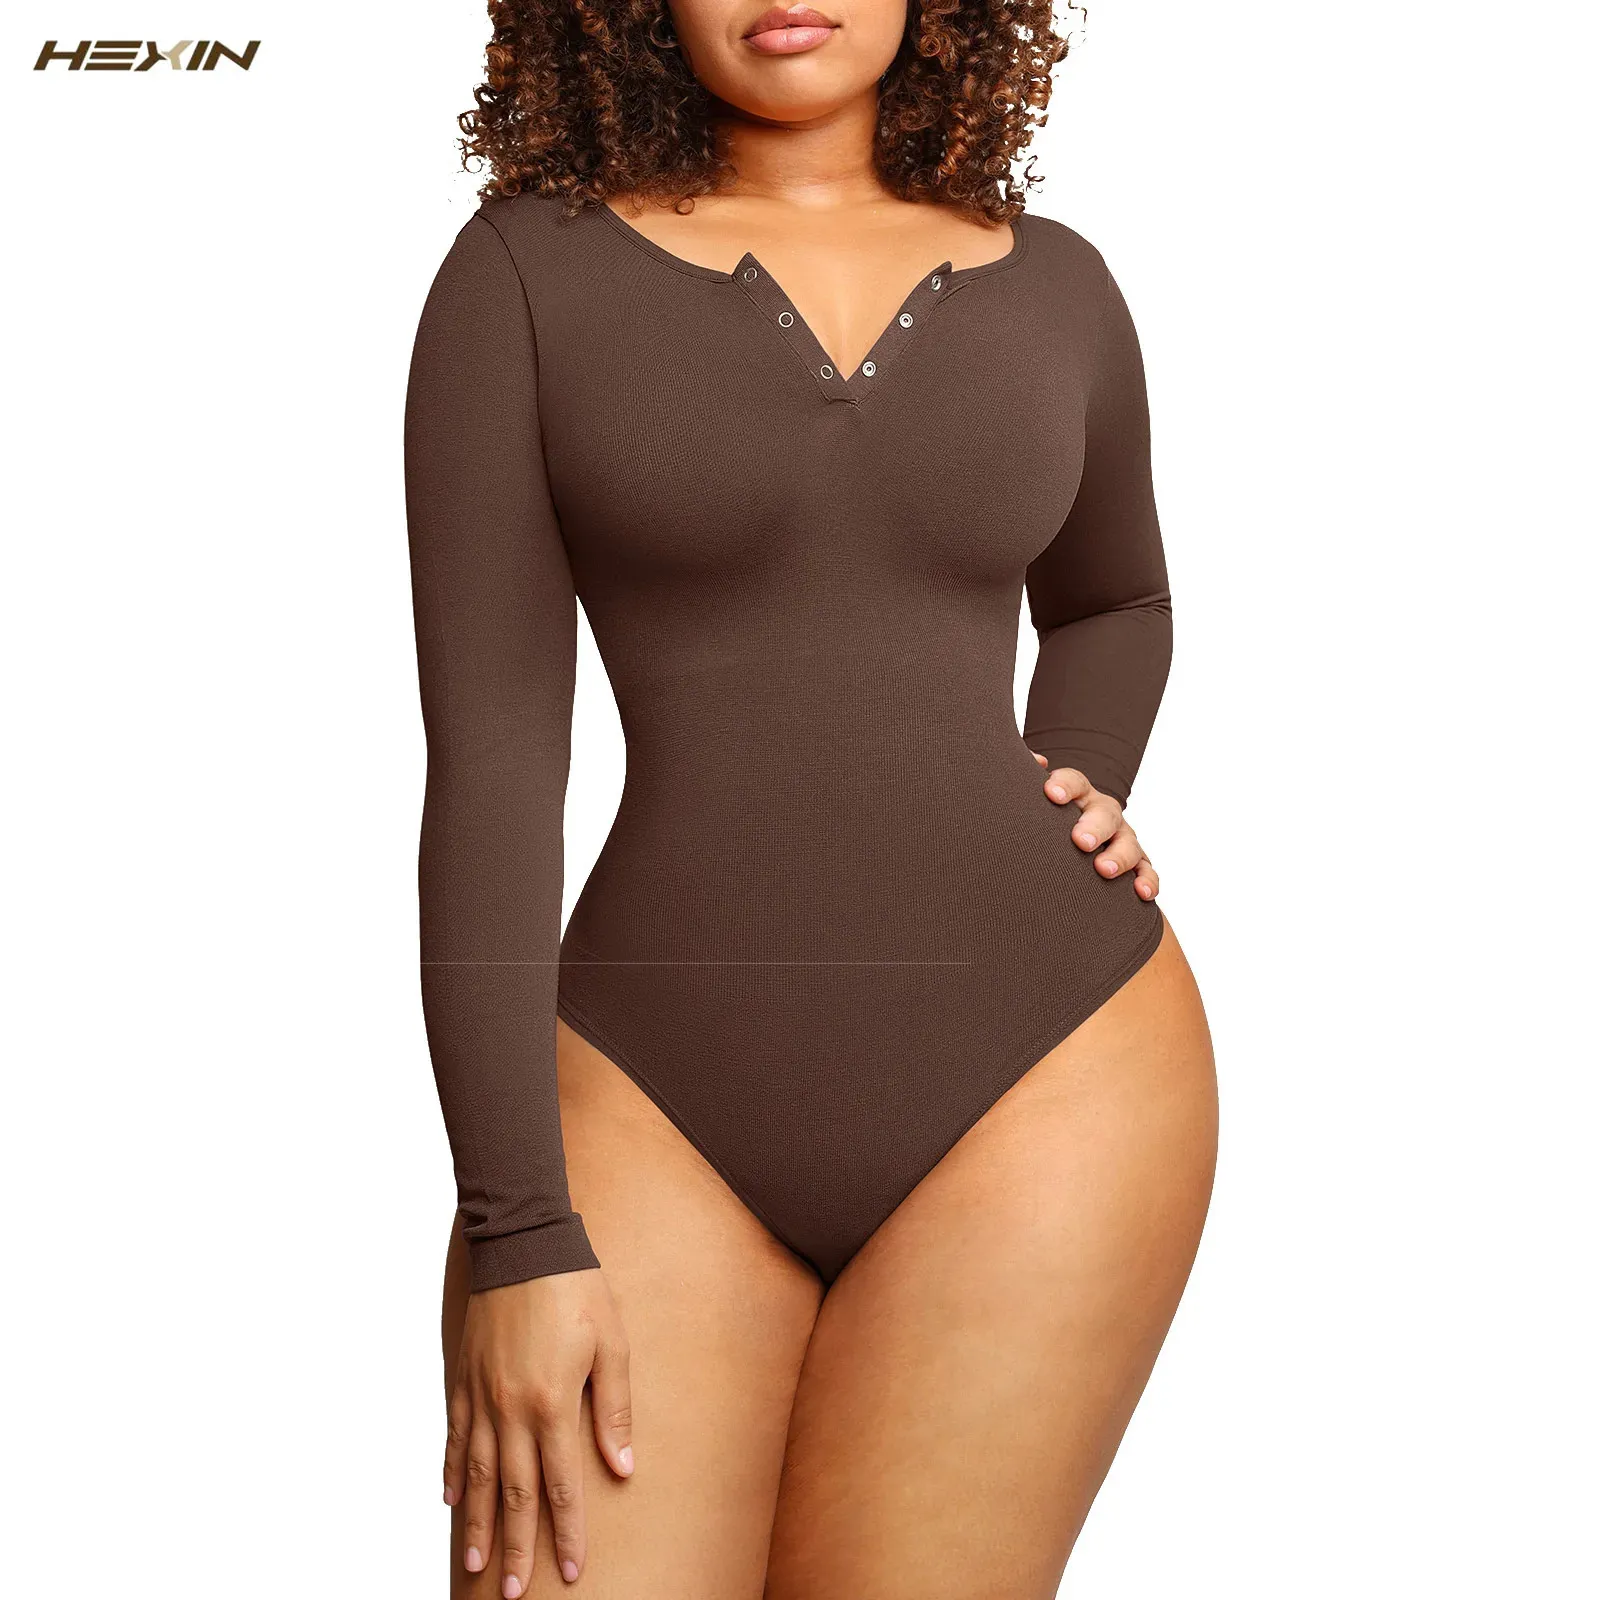 HEXIN Womens Colombian Faja Shapewear Bodysuit With Full Coverage, Long  Sleeves, And Flattening Abdomen For Butt Lift And Body Shaping Firm Tummy  Control Thong 231122 From Kua07, $18.39